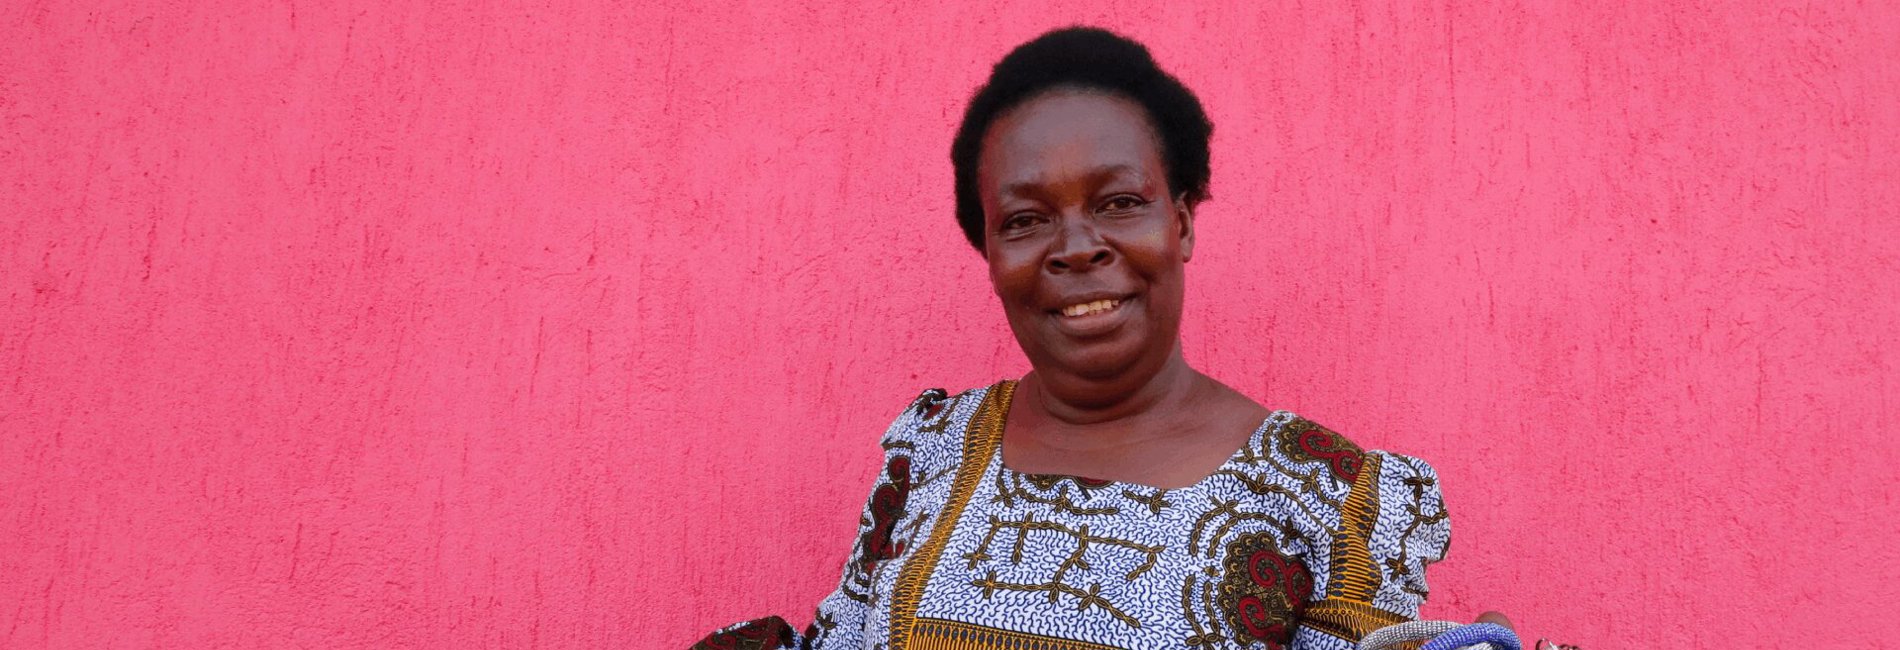 Gloria, a Congolese refugee in Uganda, shows off her brightly coloured handicrafts